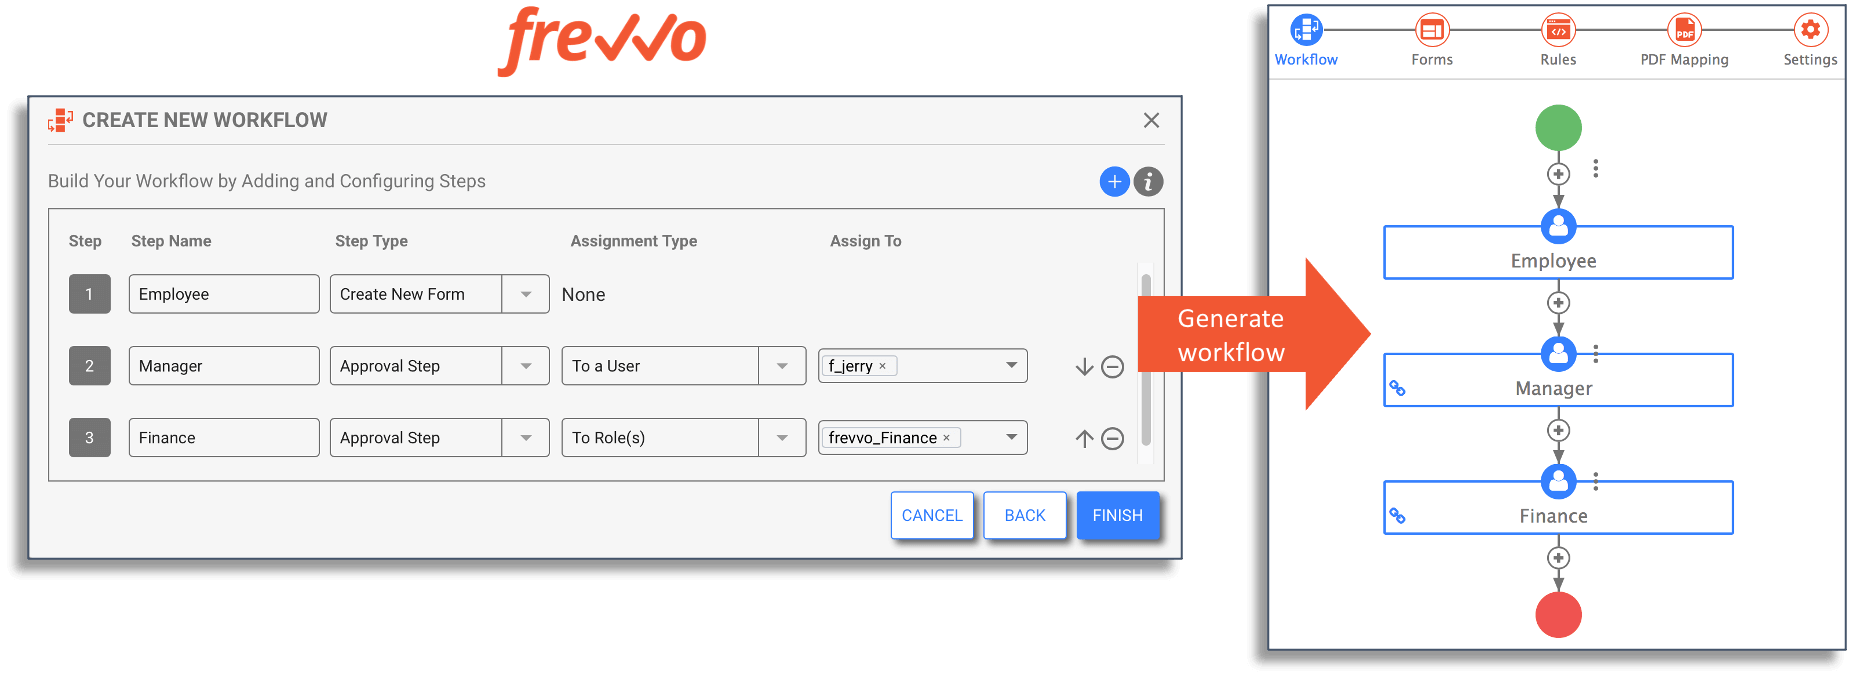 Using frevvo's workflow builder to create a workflow